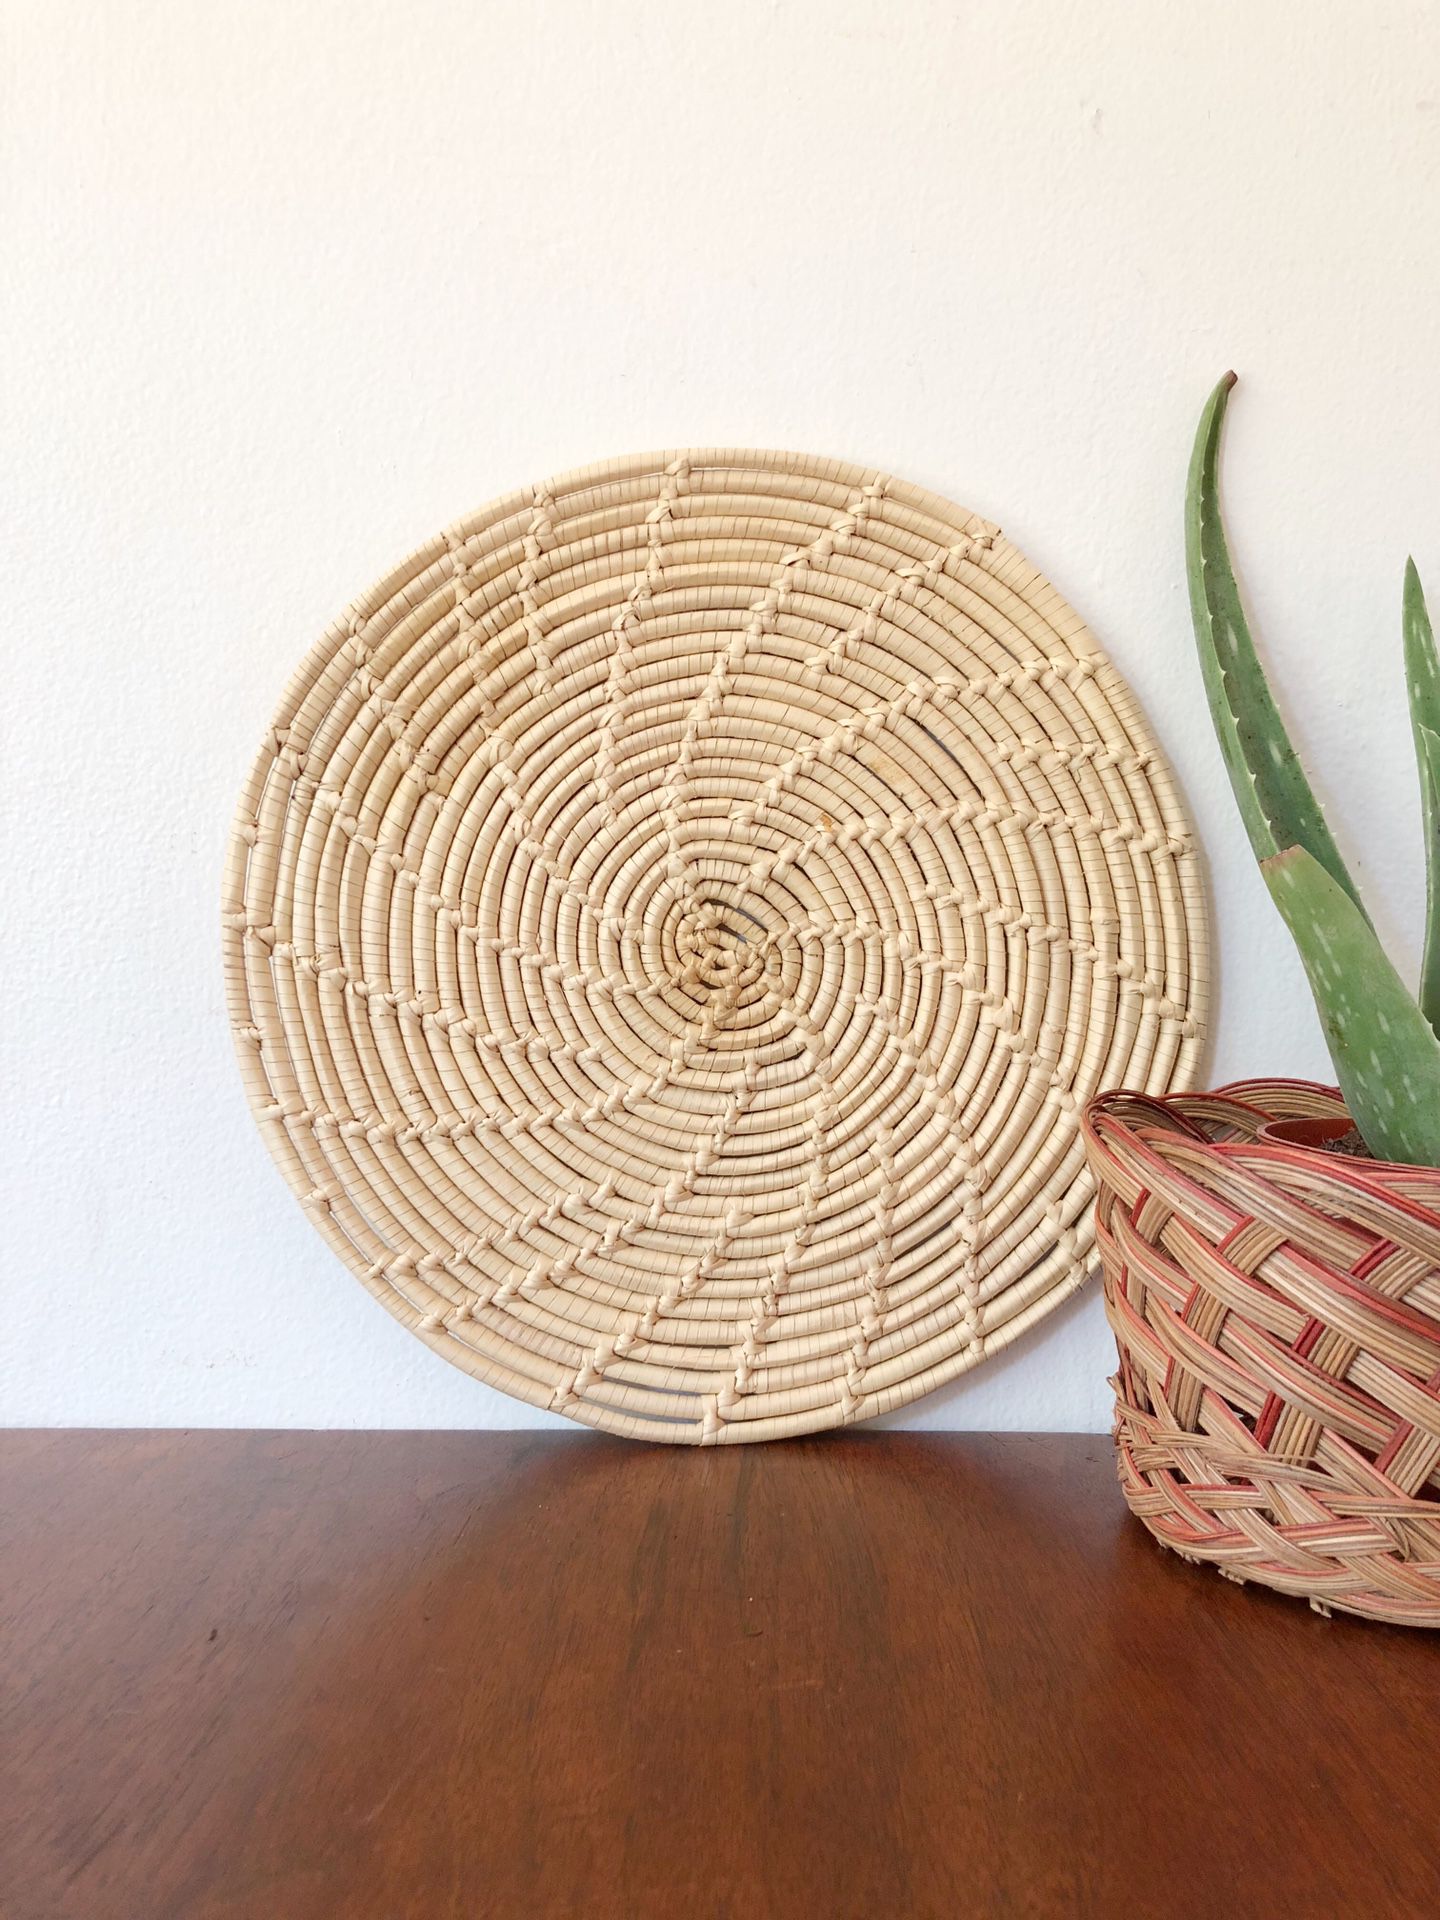 Round wicker trivet or basket wall decor / eclectic boho style